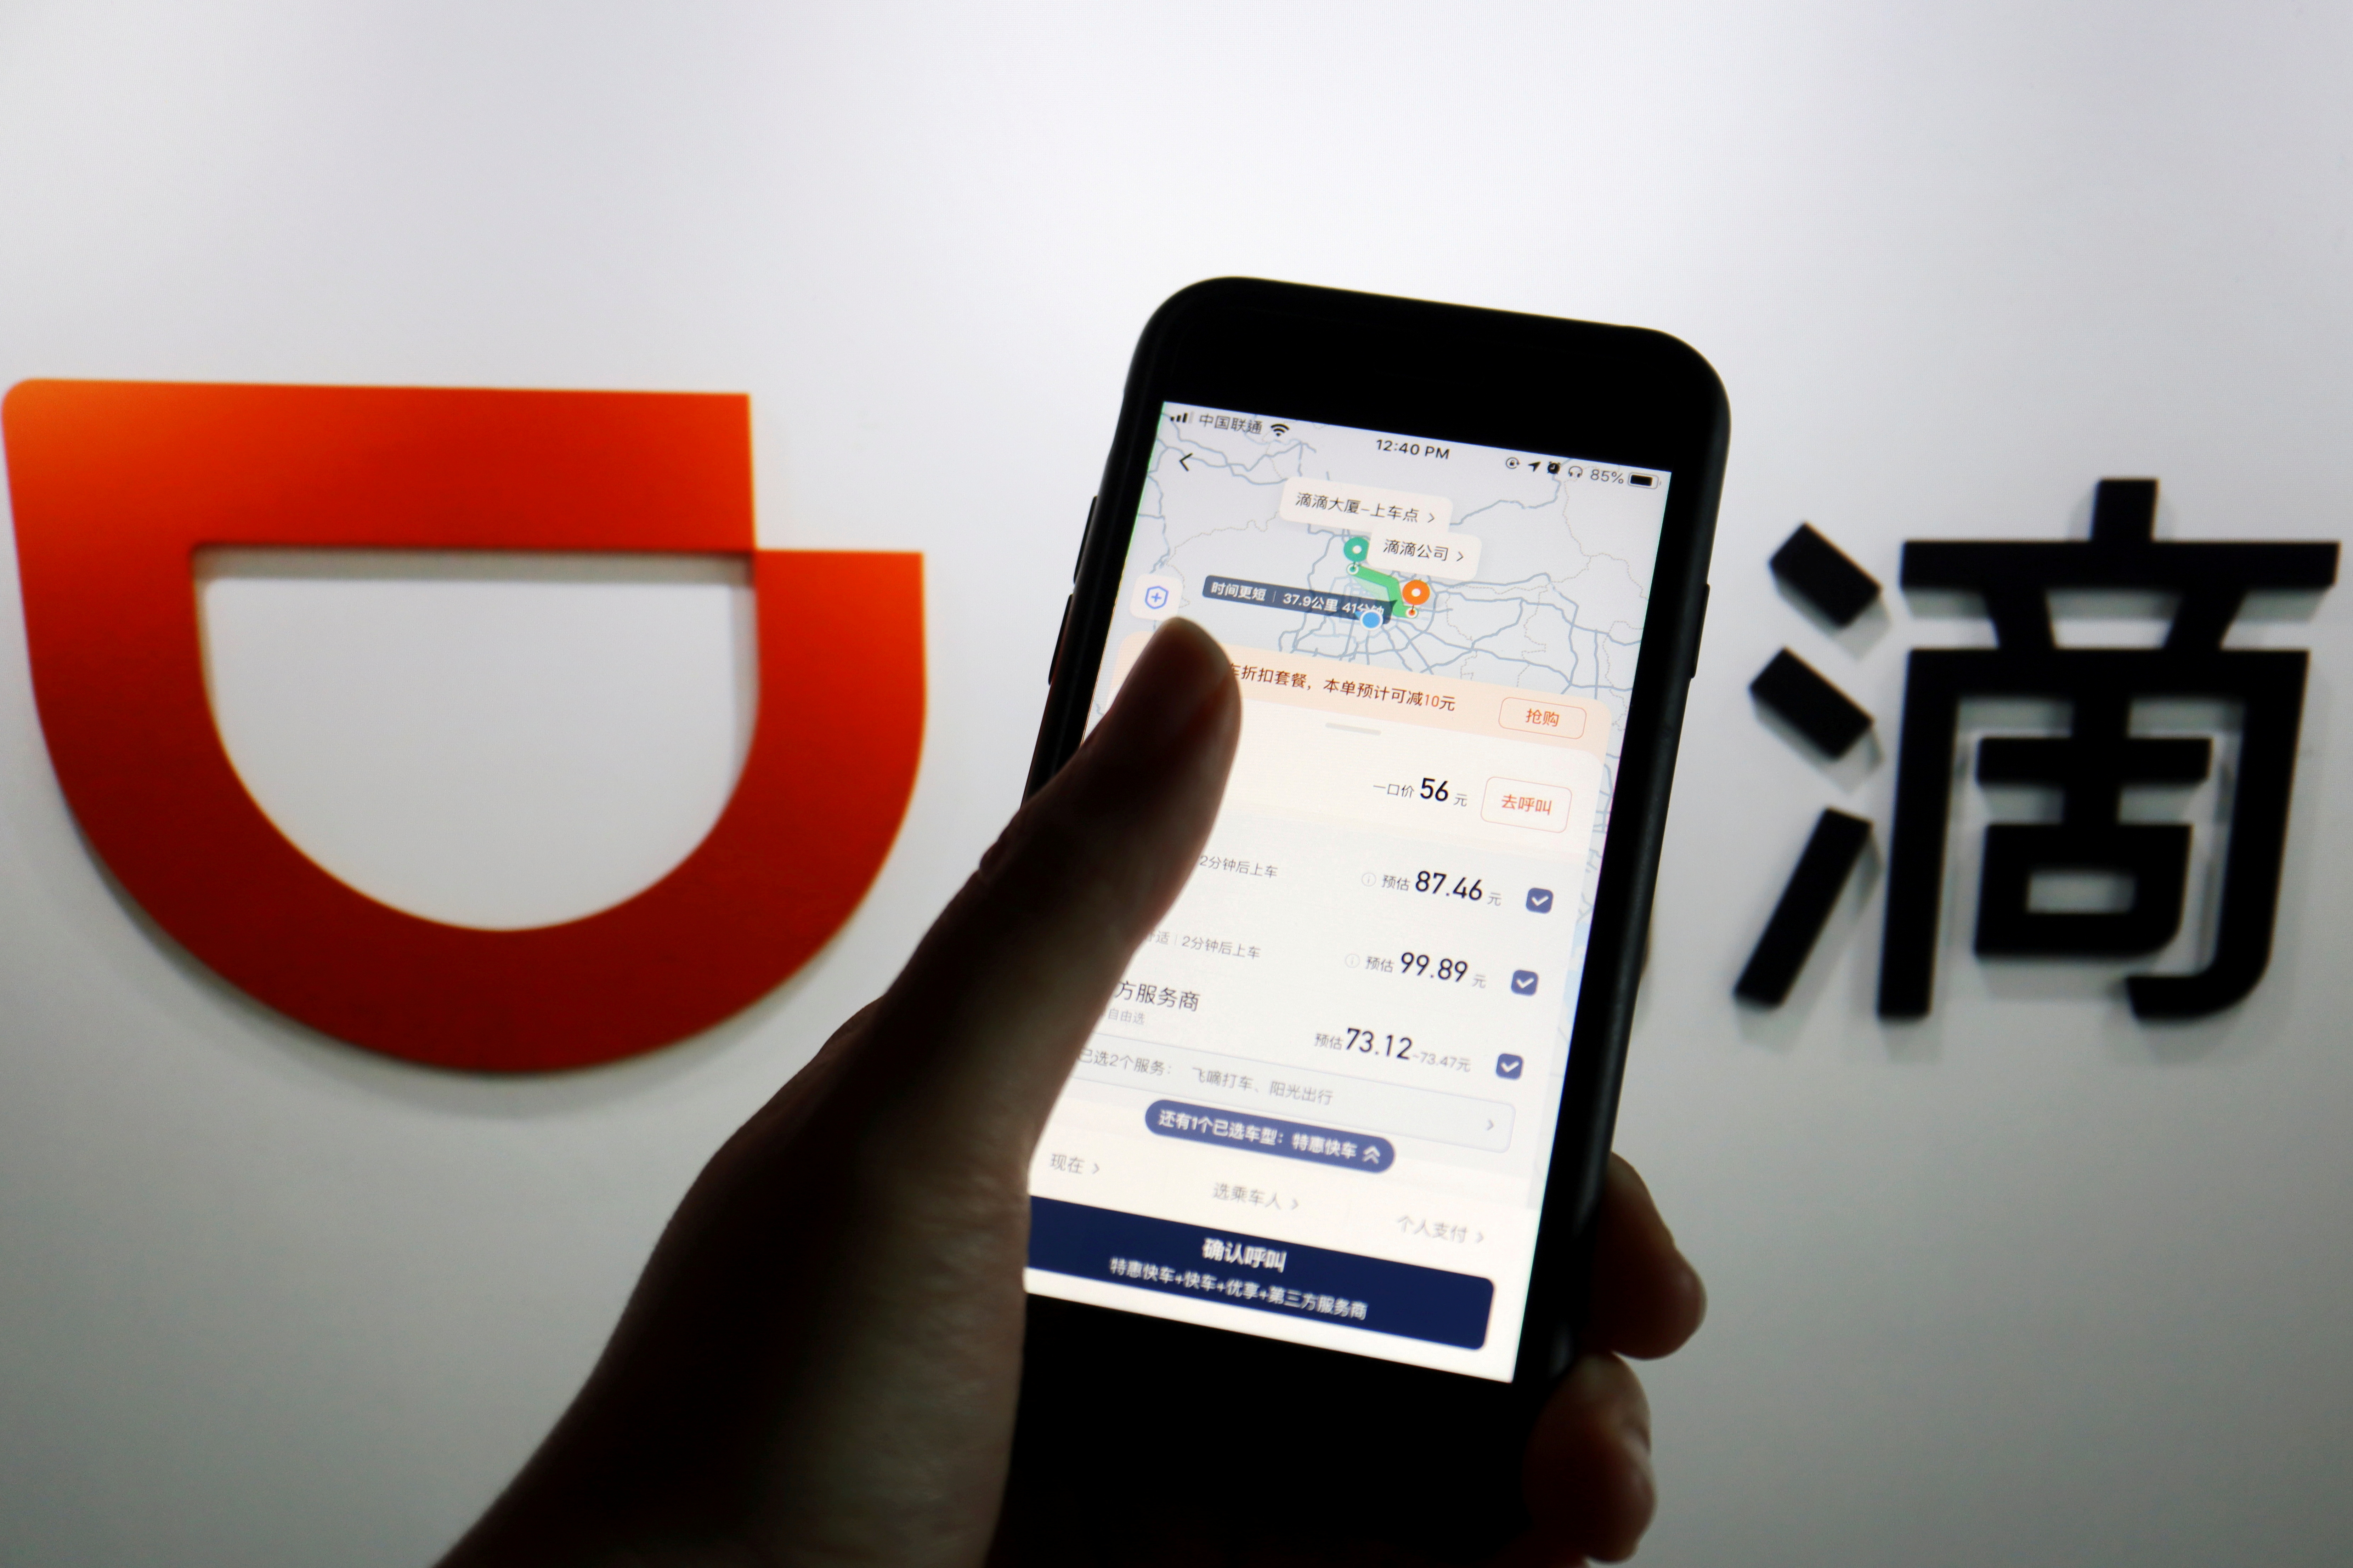 Illustration picture of Chinese ride-hailing giant Didi